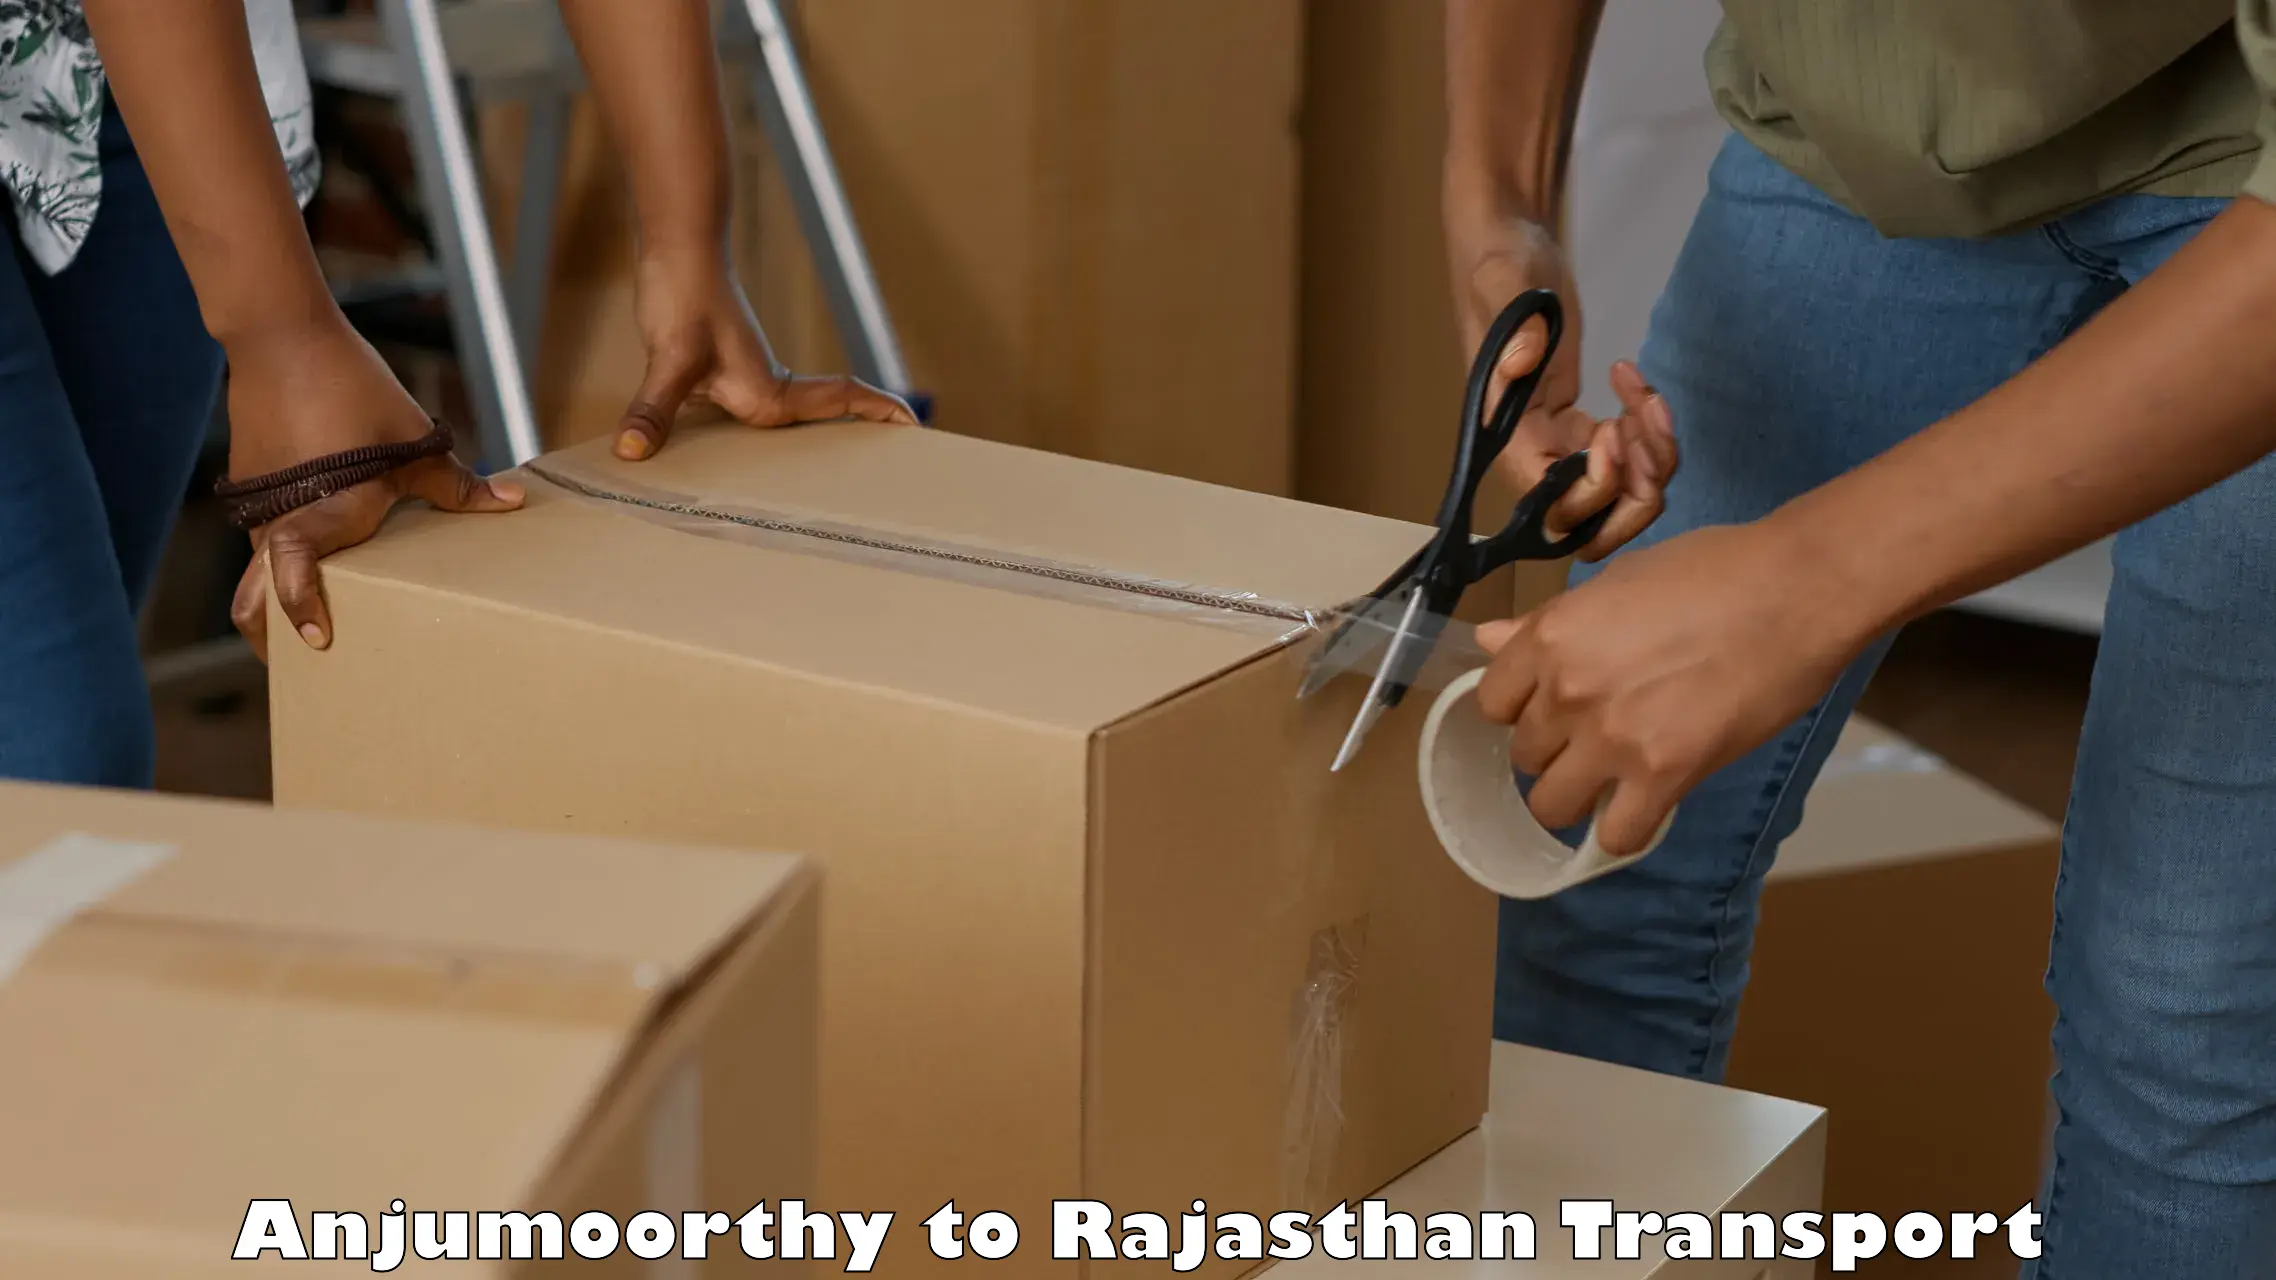 Air cargo transport services Anjumoorthy to Rajasthan